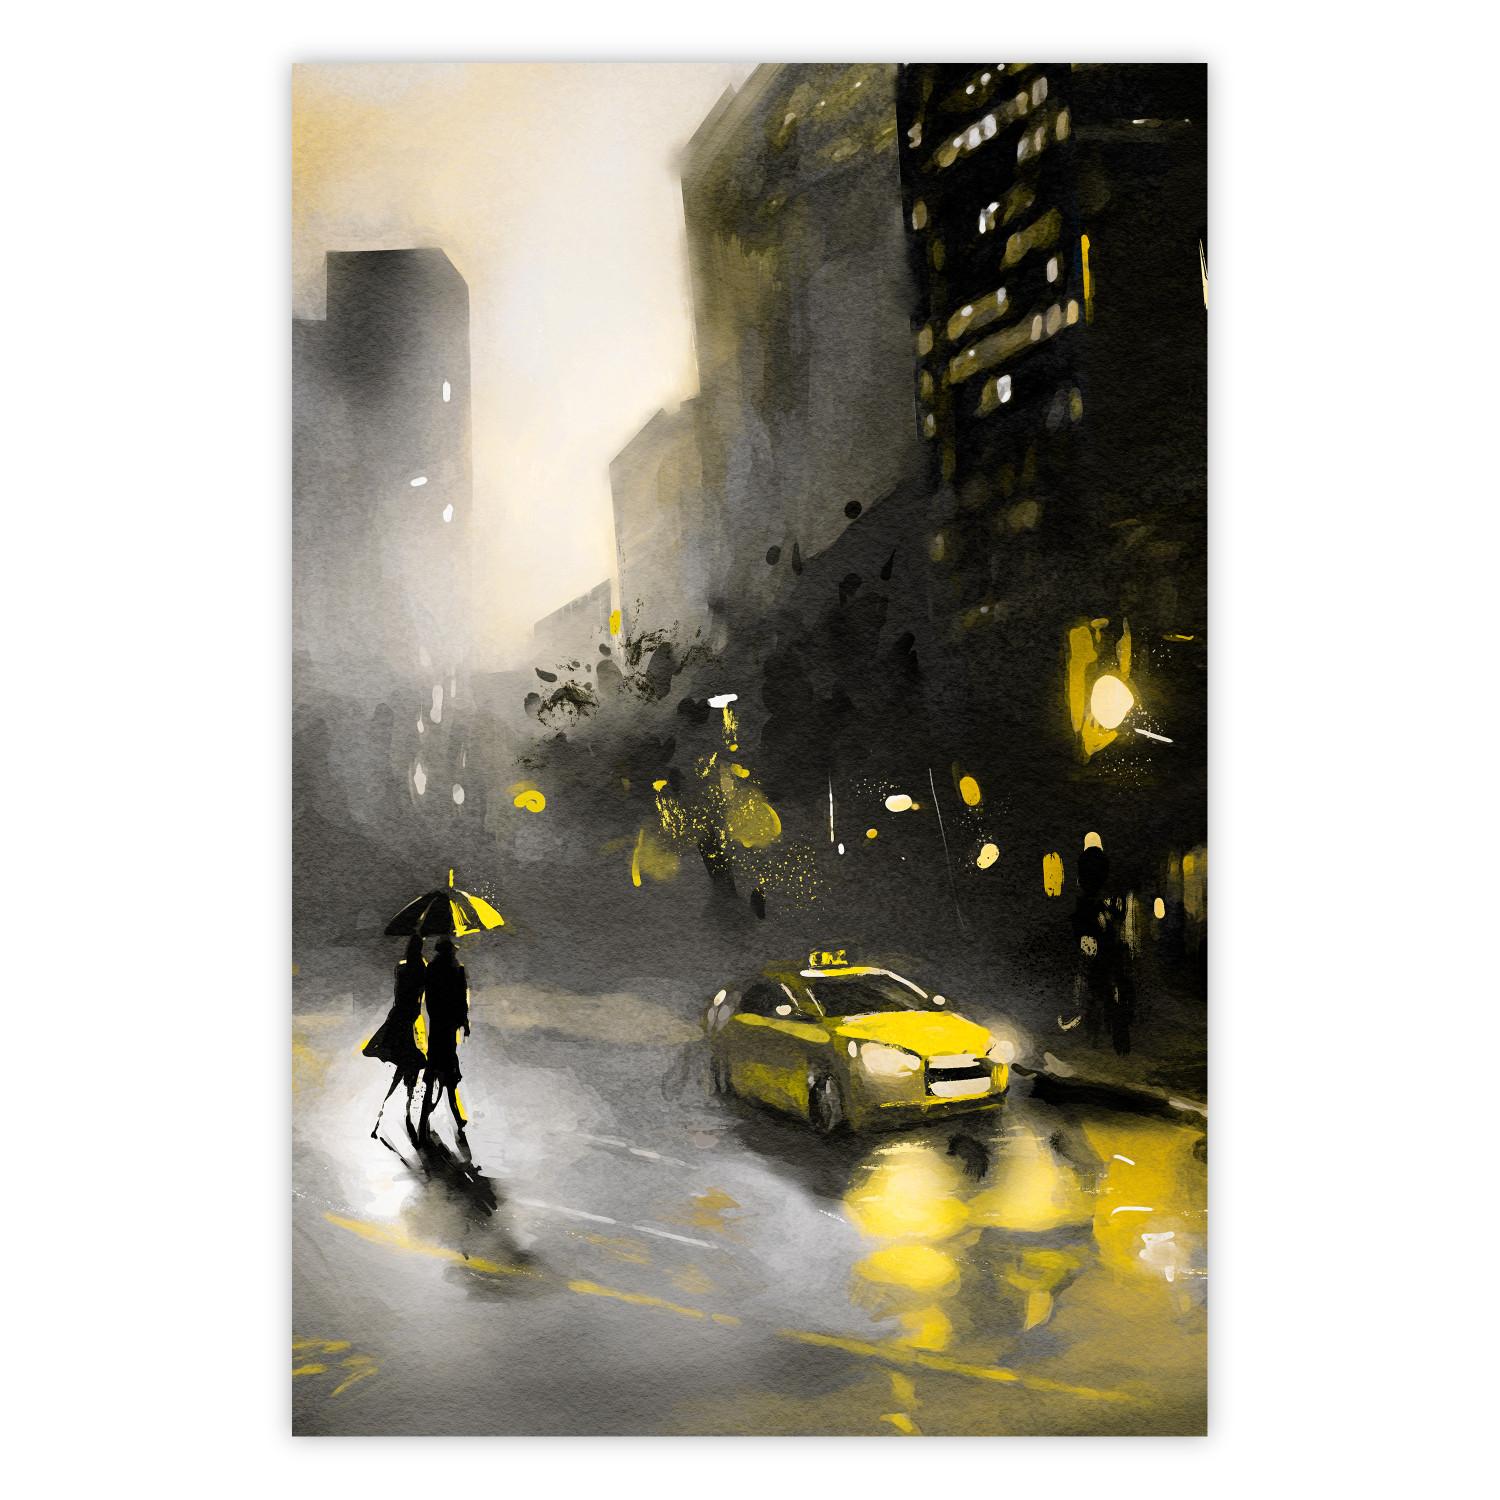 Poster City Glow - yellow car and people against a gloomy architectural backdrop